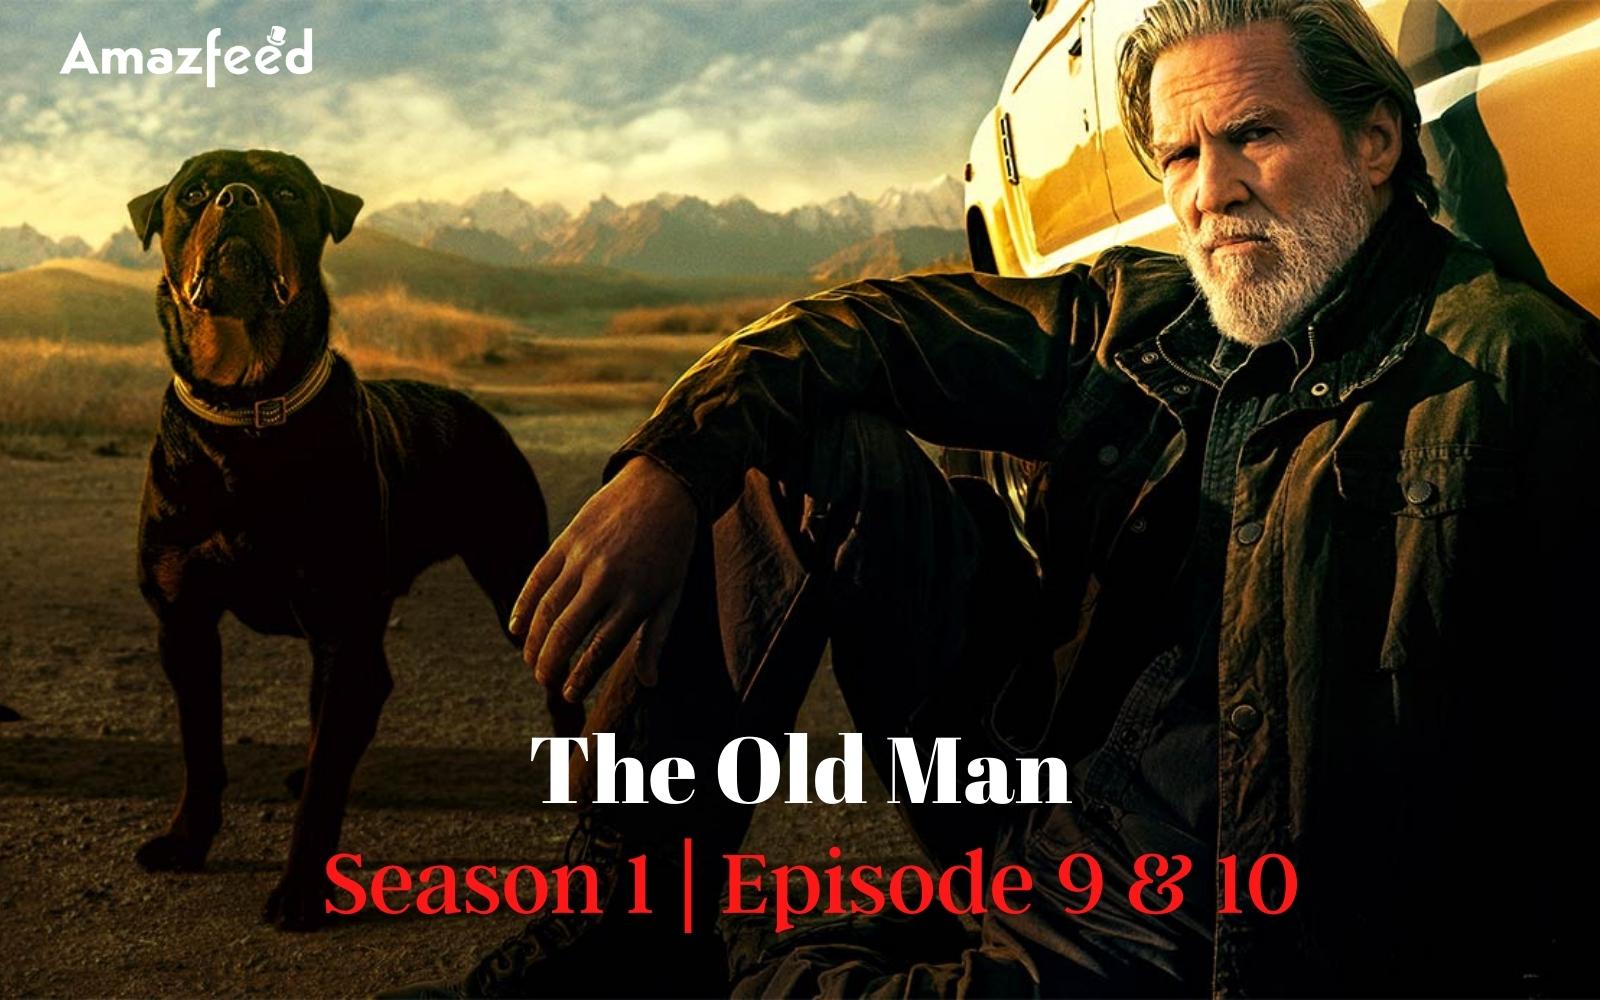 The Old Man Season 1 Episode 9, 10 : Countdown, Release Date, Summary, Spoiler, and Cast